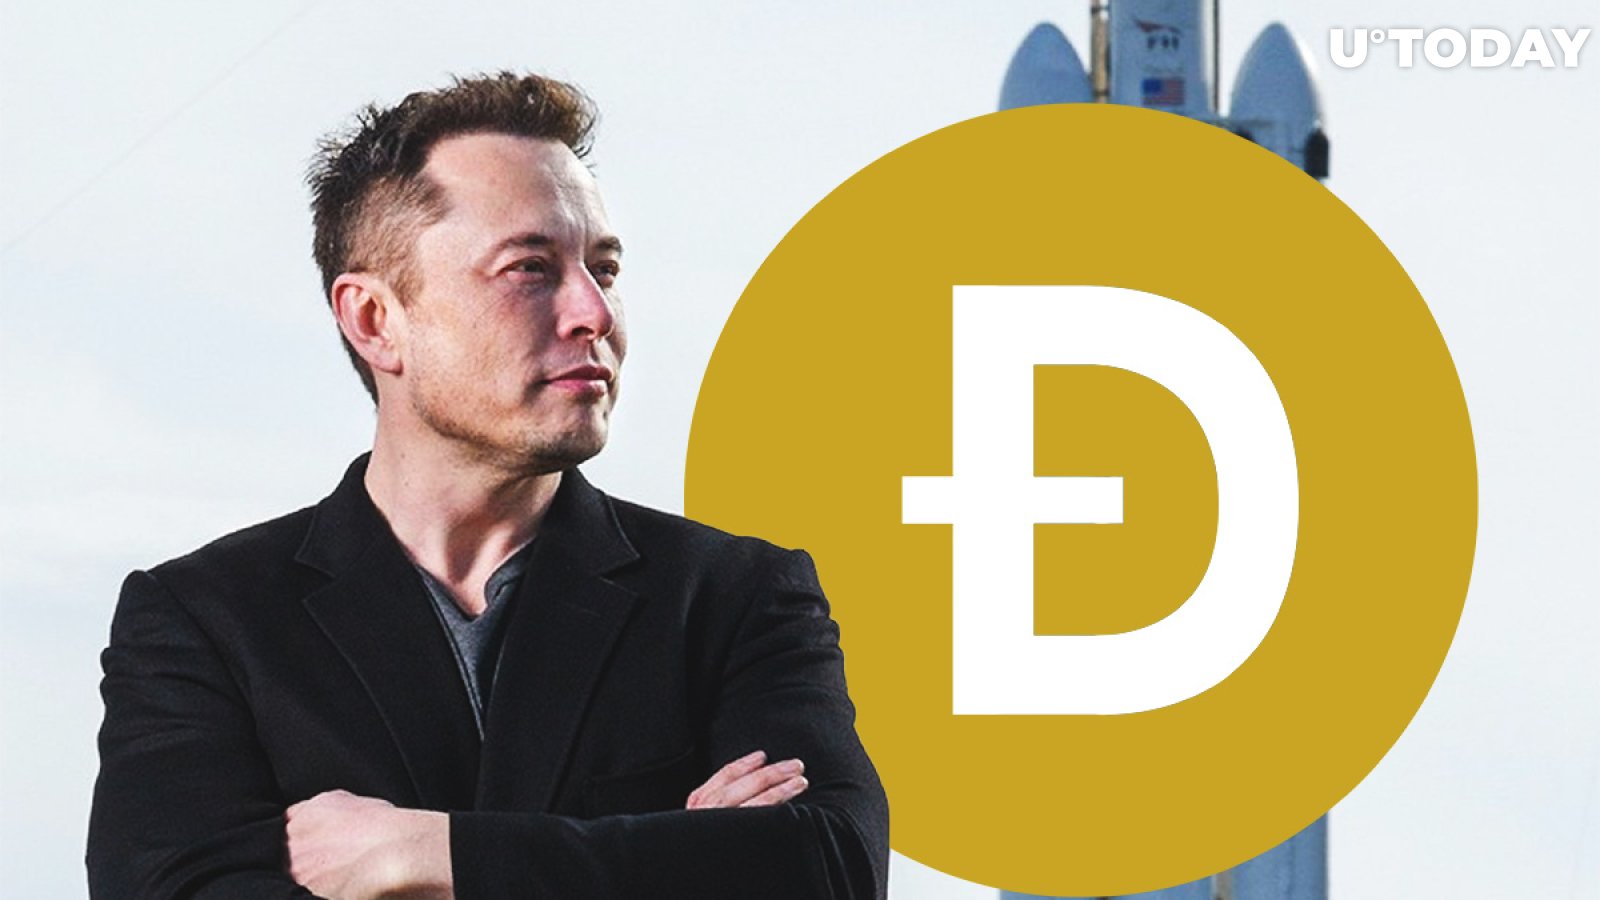 Dogecoin Spikes 10 Percent as Elon Musk Confirms That It Will Be Part of His "SNL" Skit 